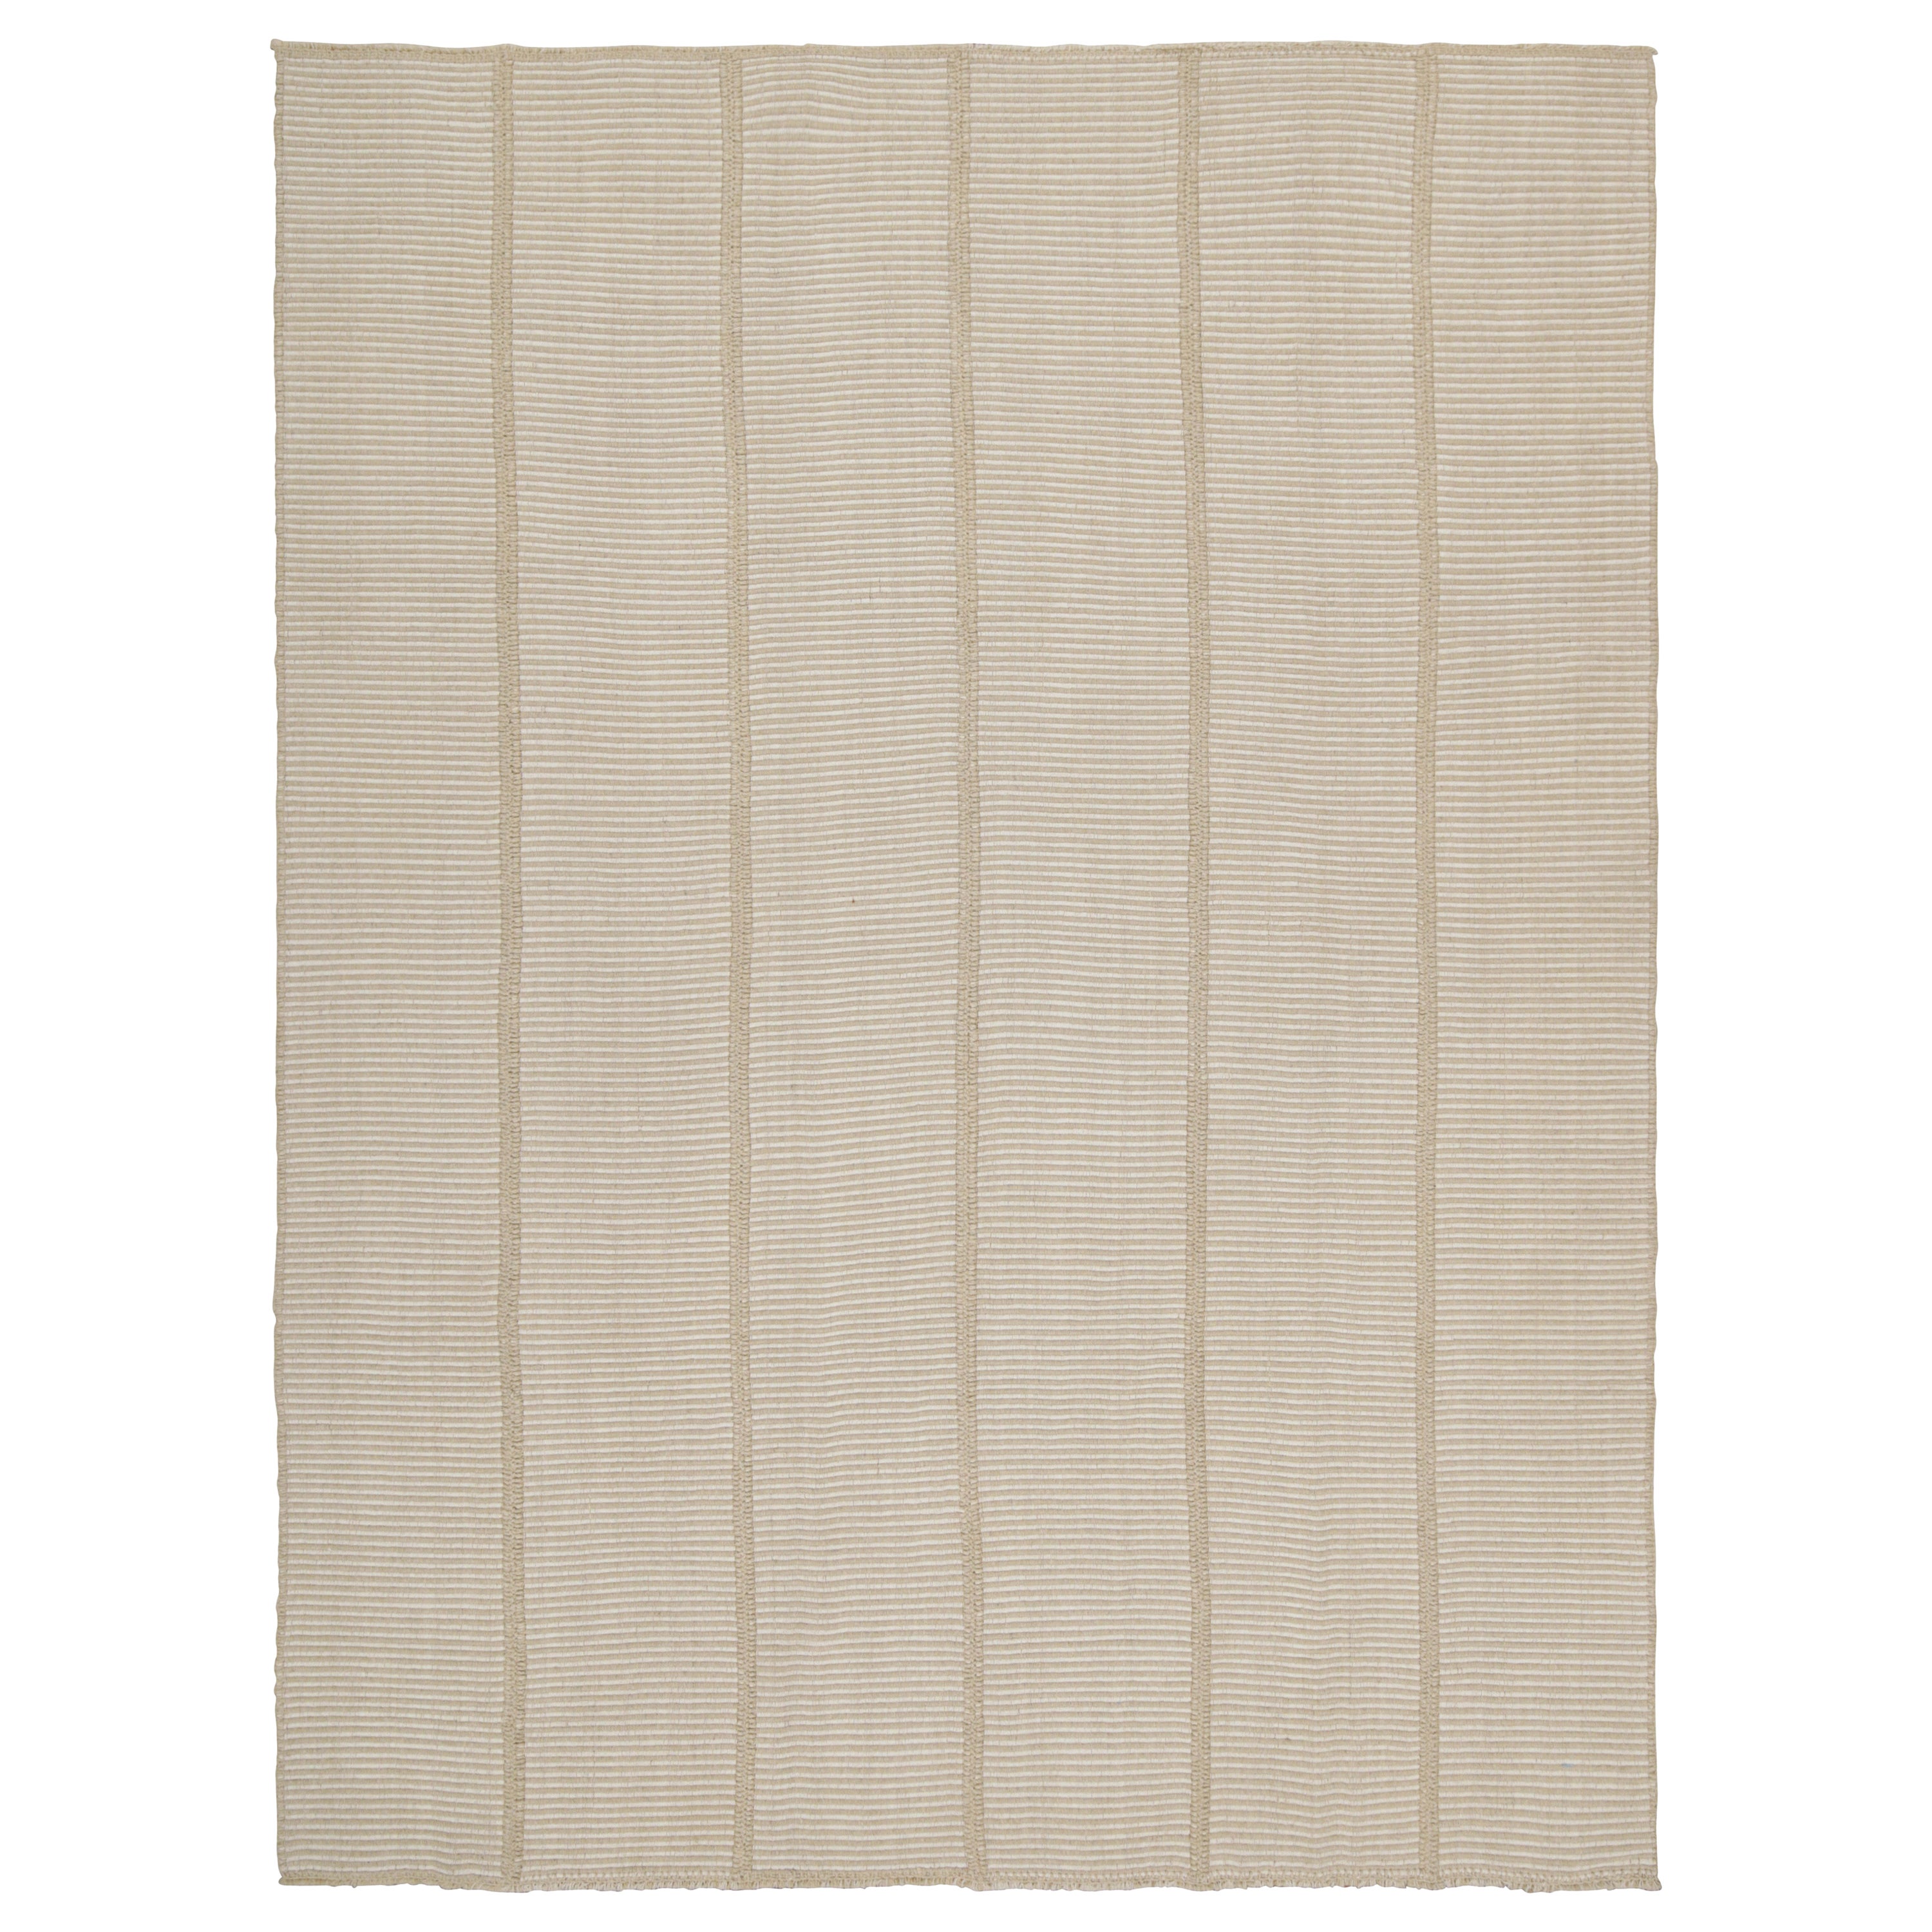 Rug & Kilim’s Contemporary Kilim in Off-White and Beige Stripes